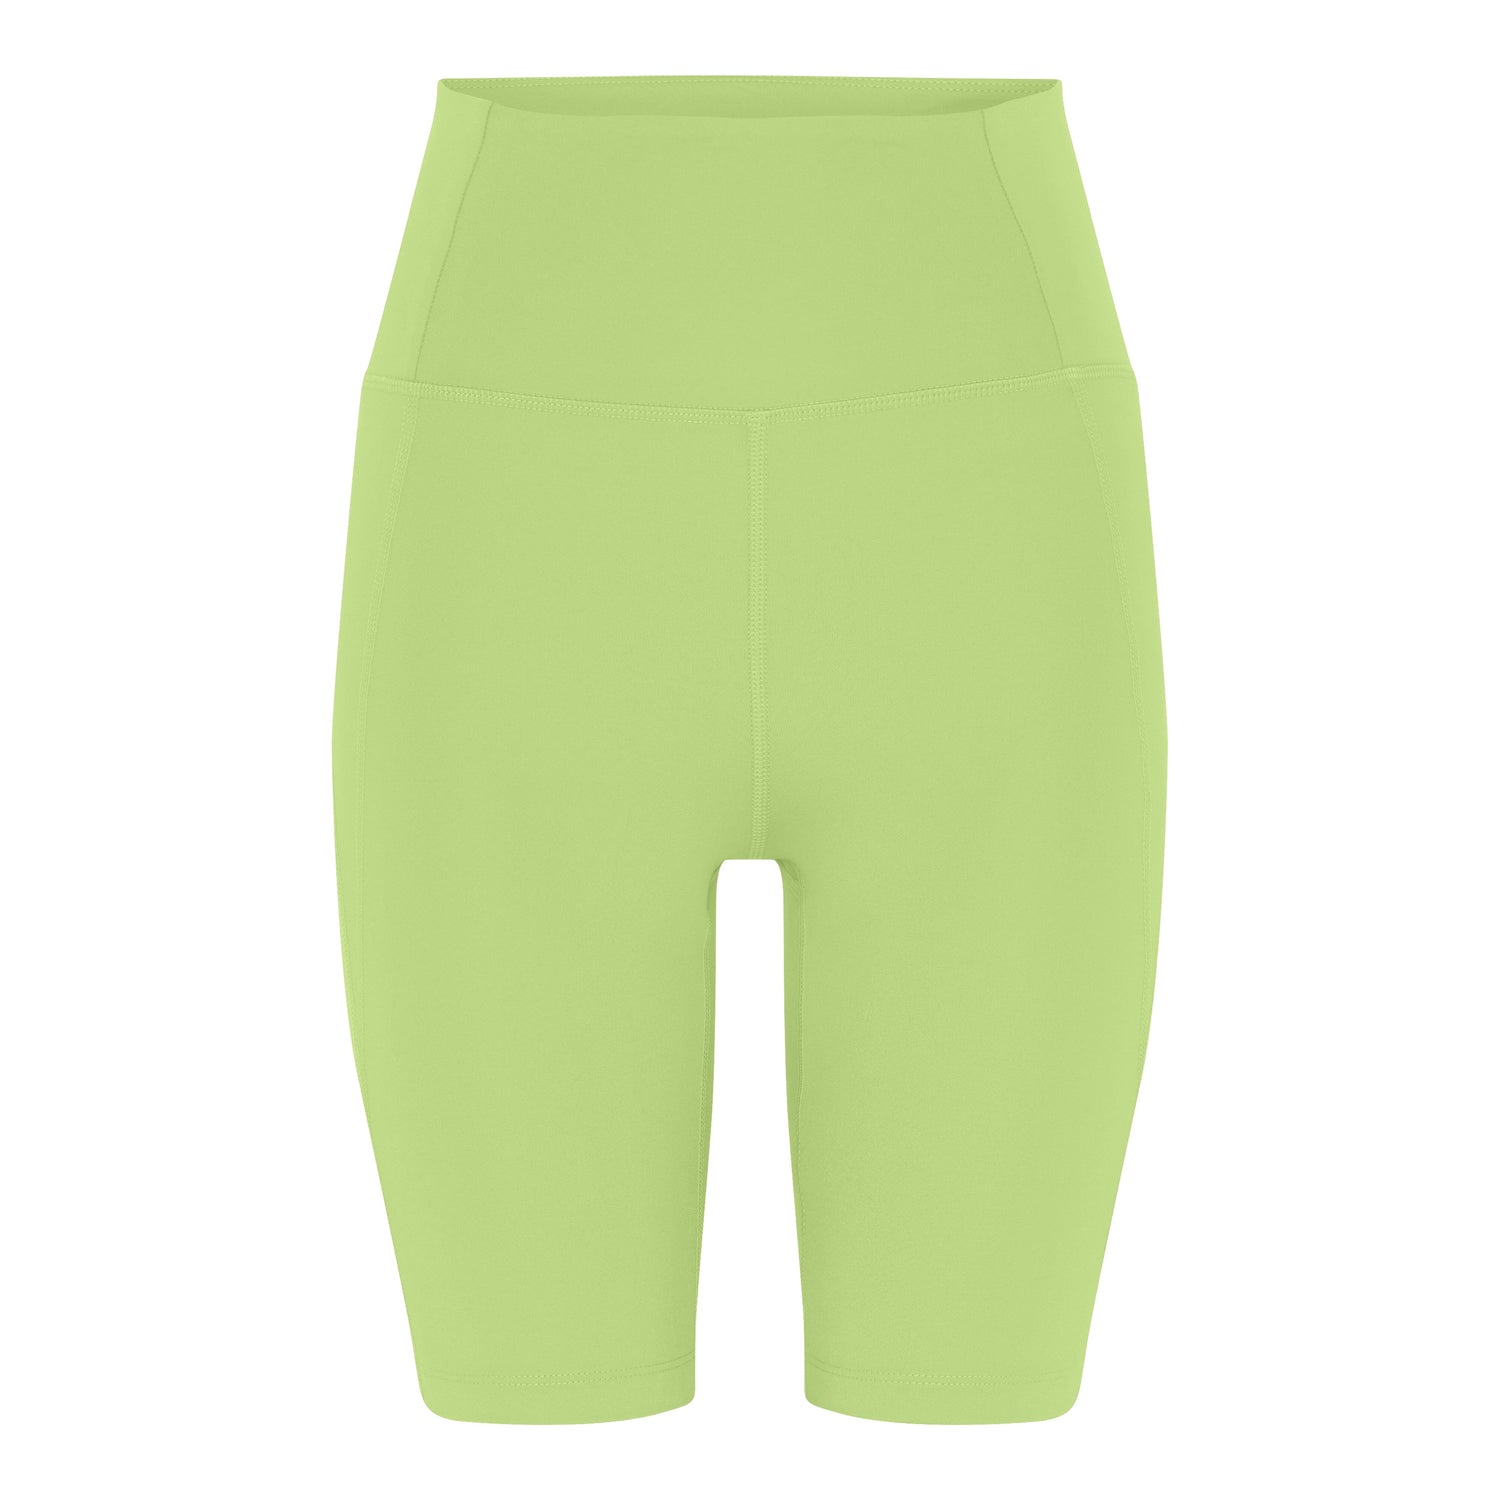 Girlfriend Collective Bike Shorts - Made from recycled plastic bottles Key Lime Pants